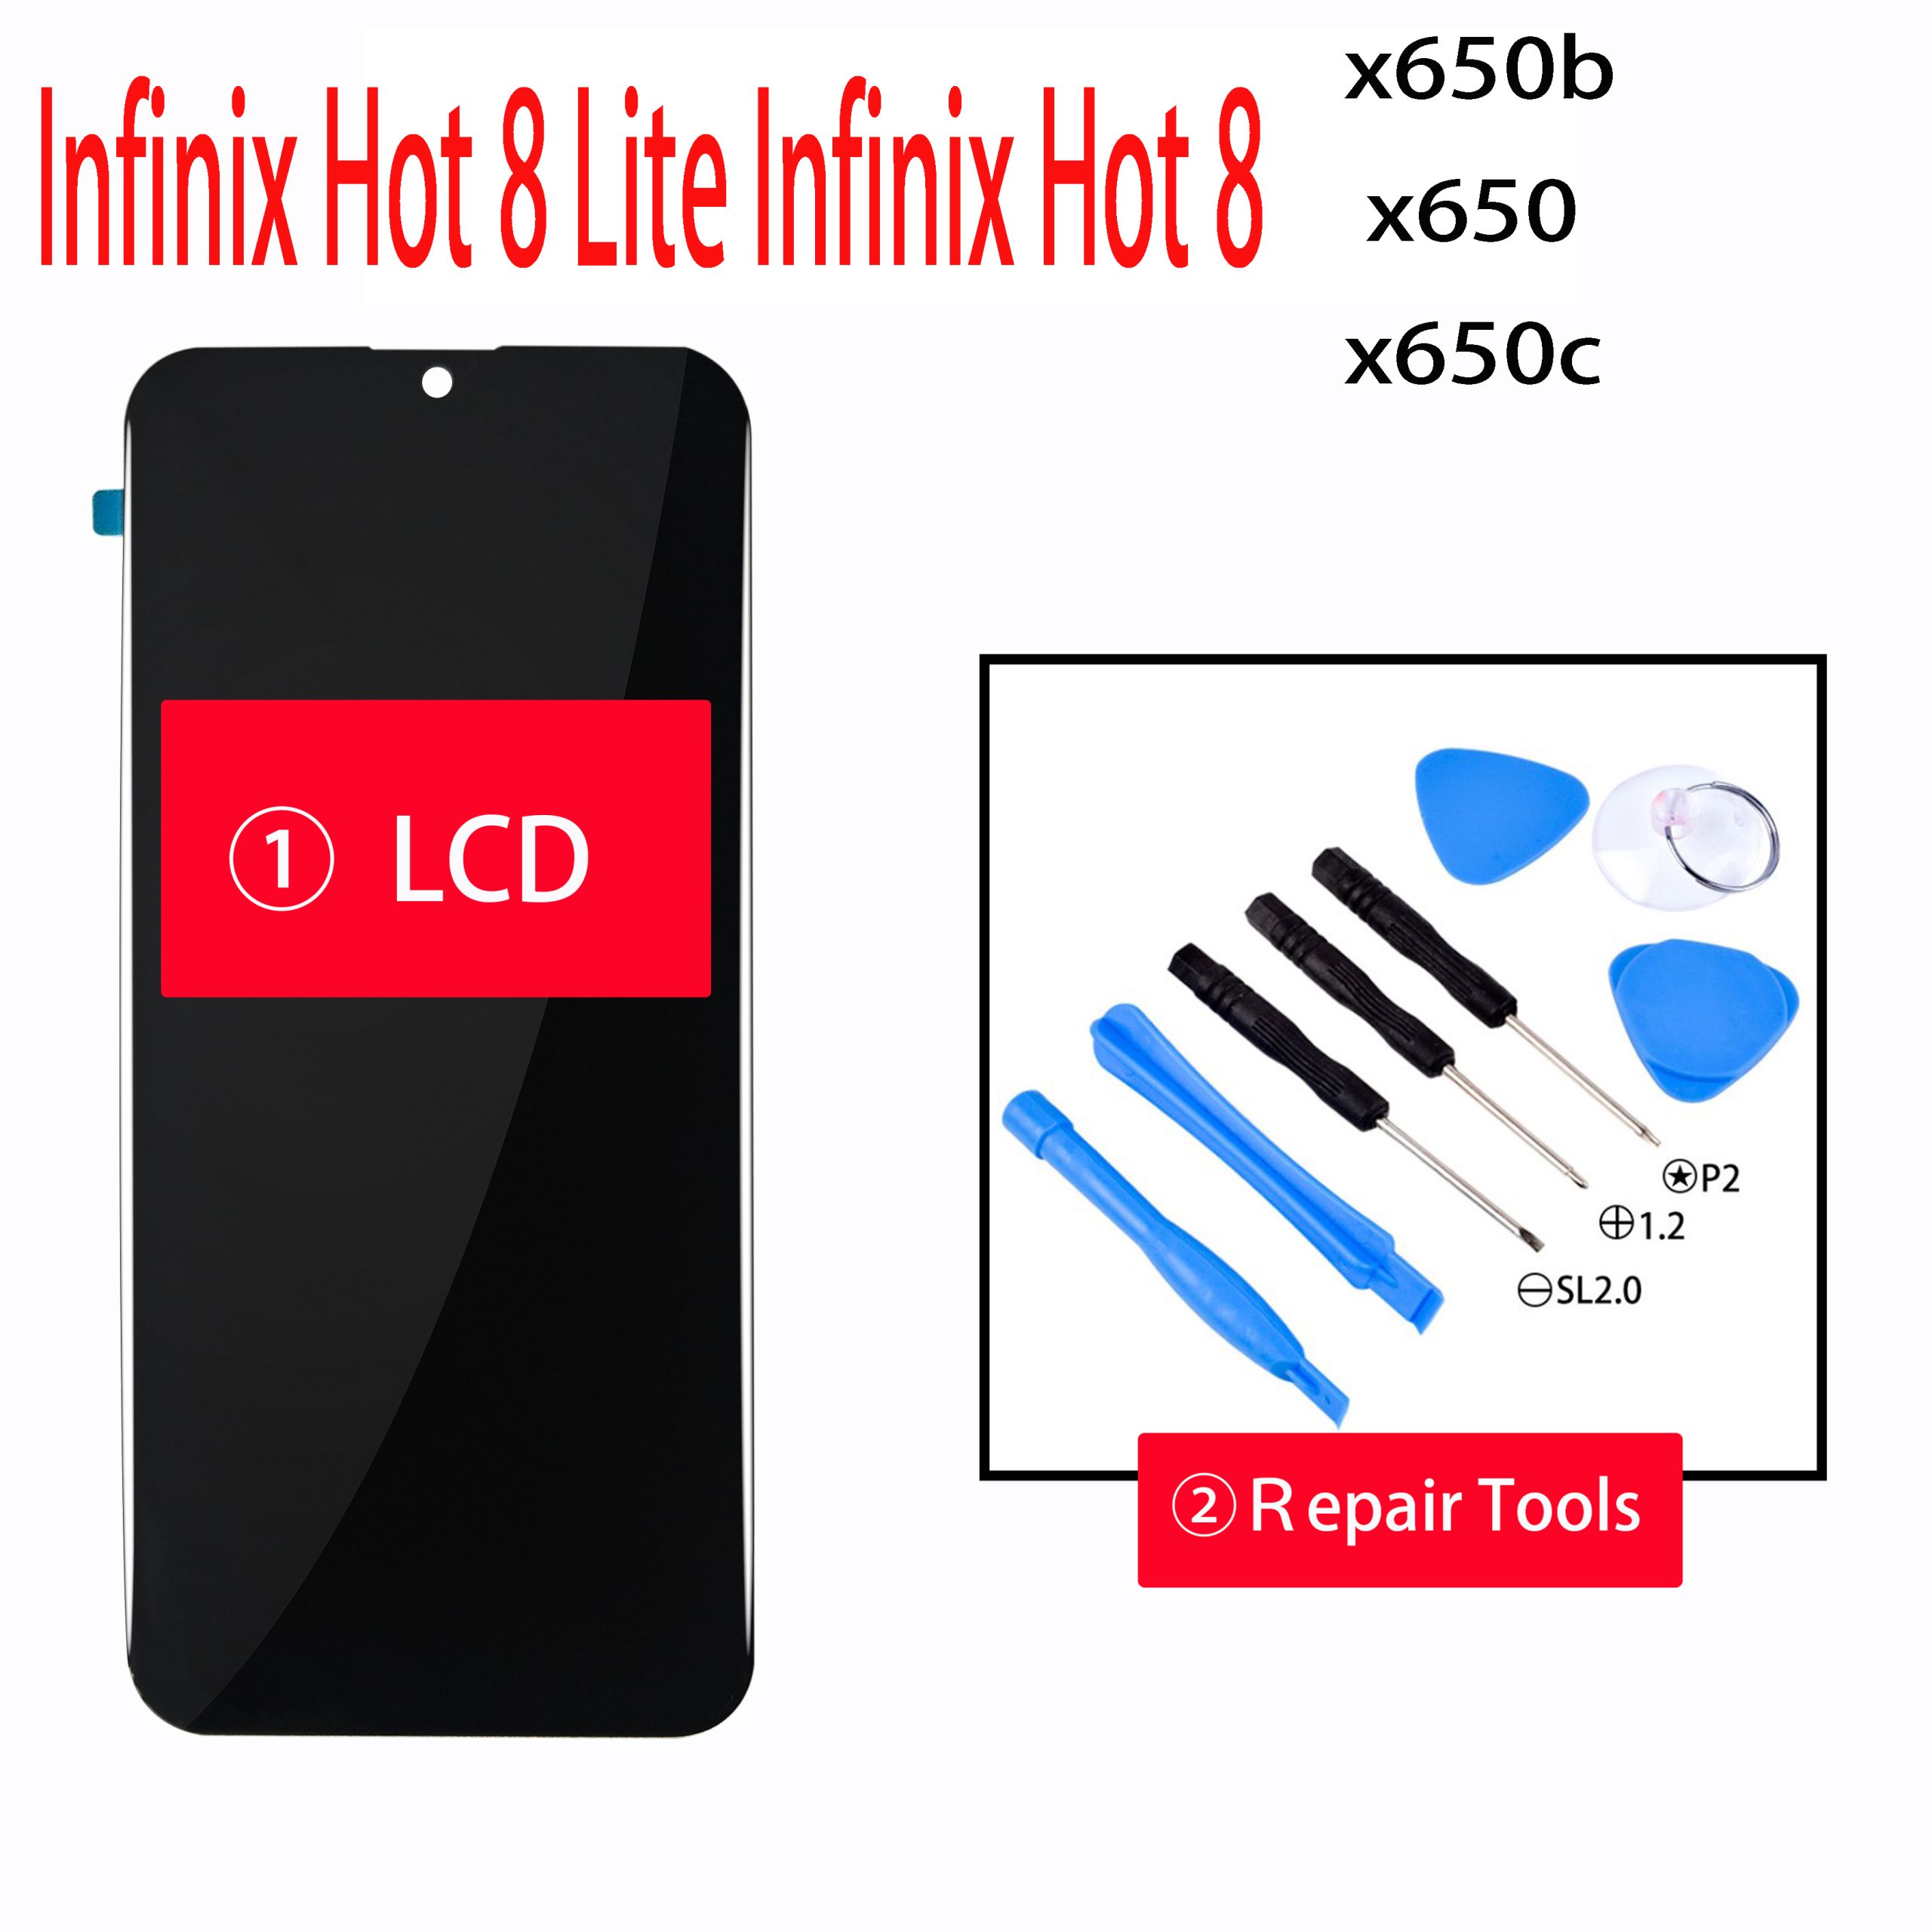 New-Infinix-Hot-8-x650b-x650-x650c-LCD-Display-and-Touch-Screen-Digitizer-Assembly-Repair-Parts